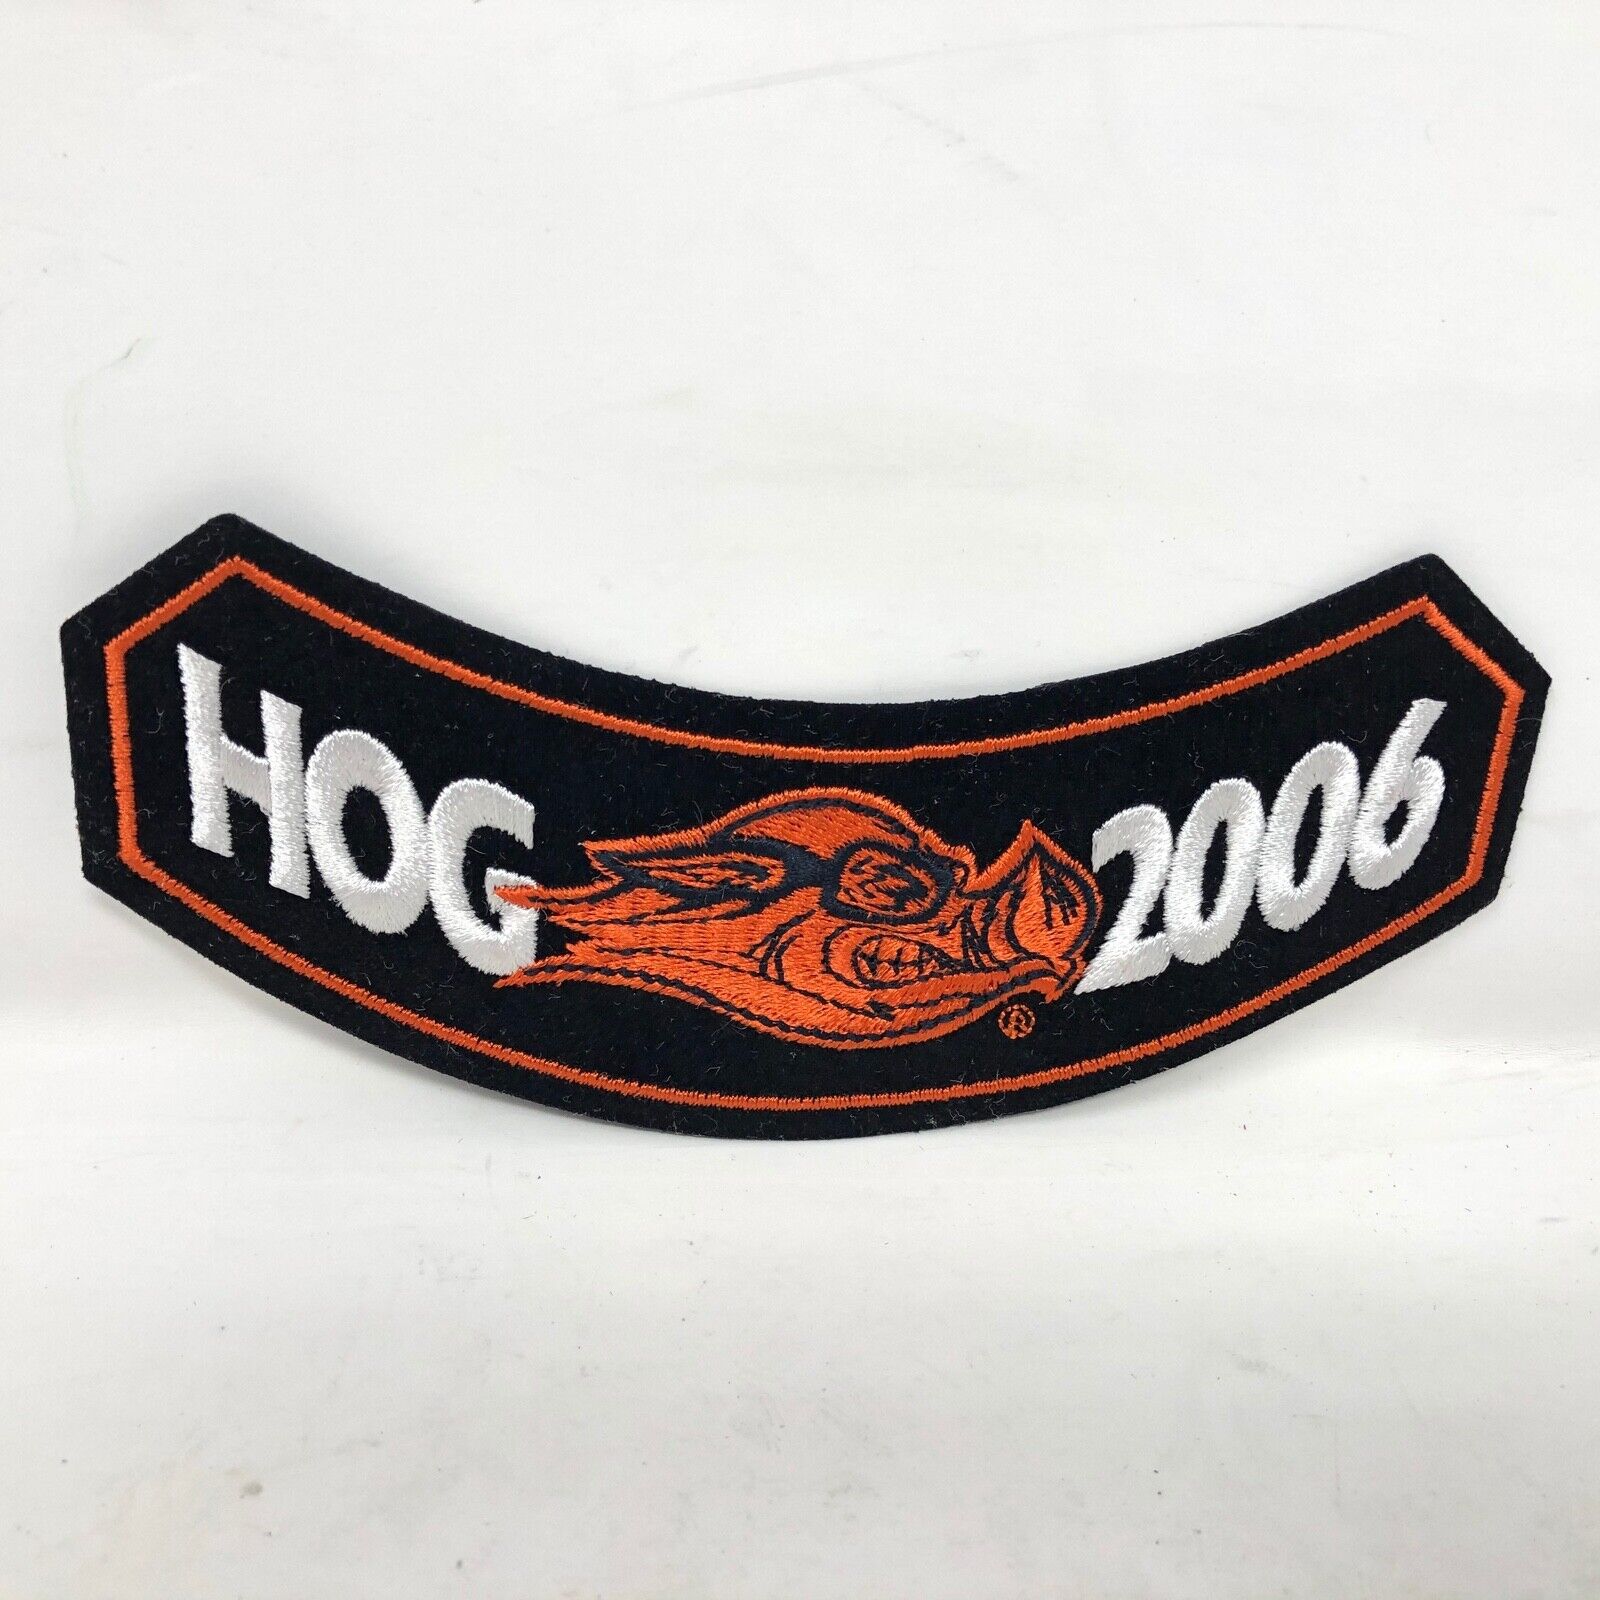 New Harley Davidson 2006 HOG Harley Owners Group Rocker Patch Motorcycles